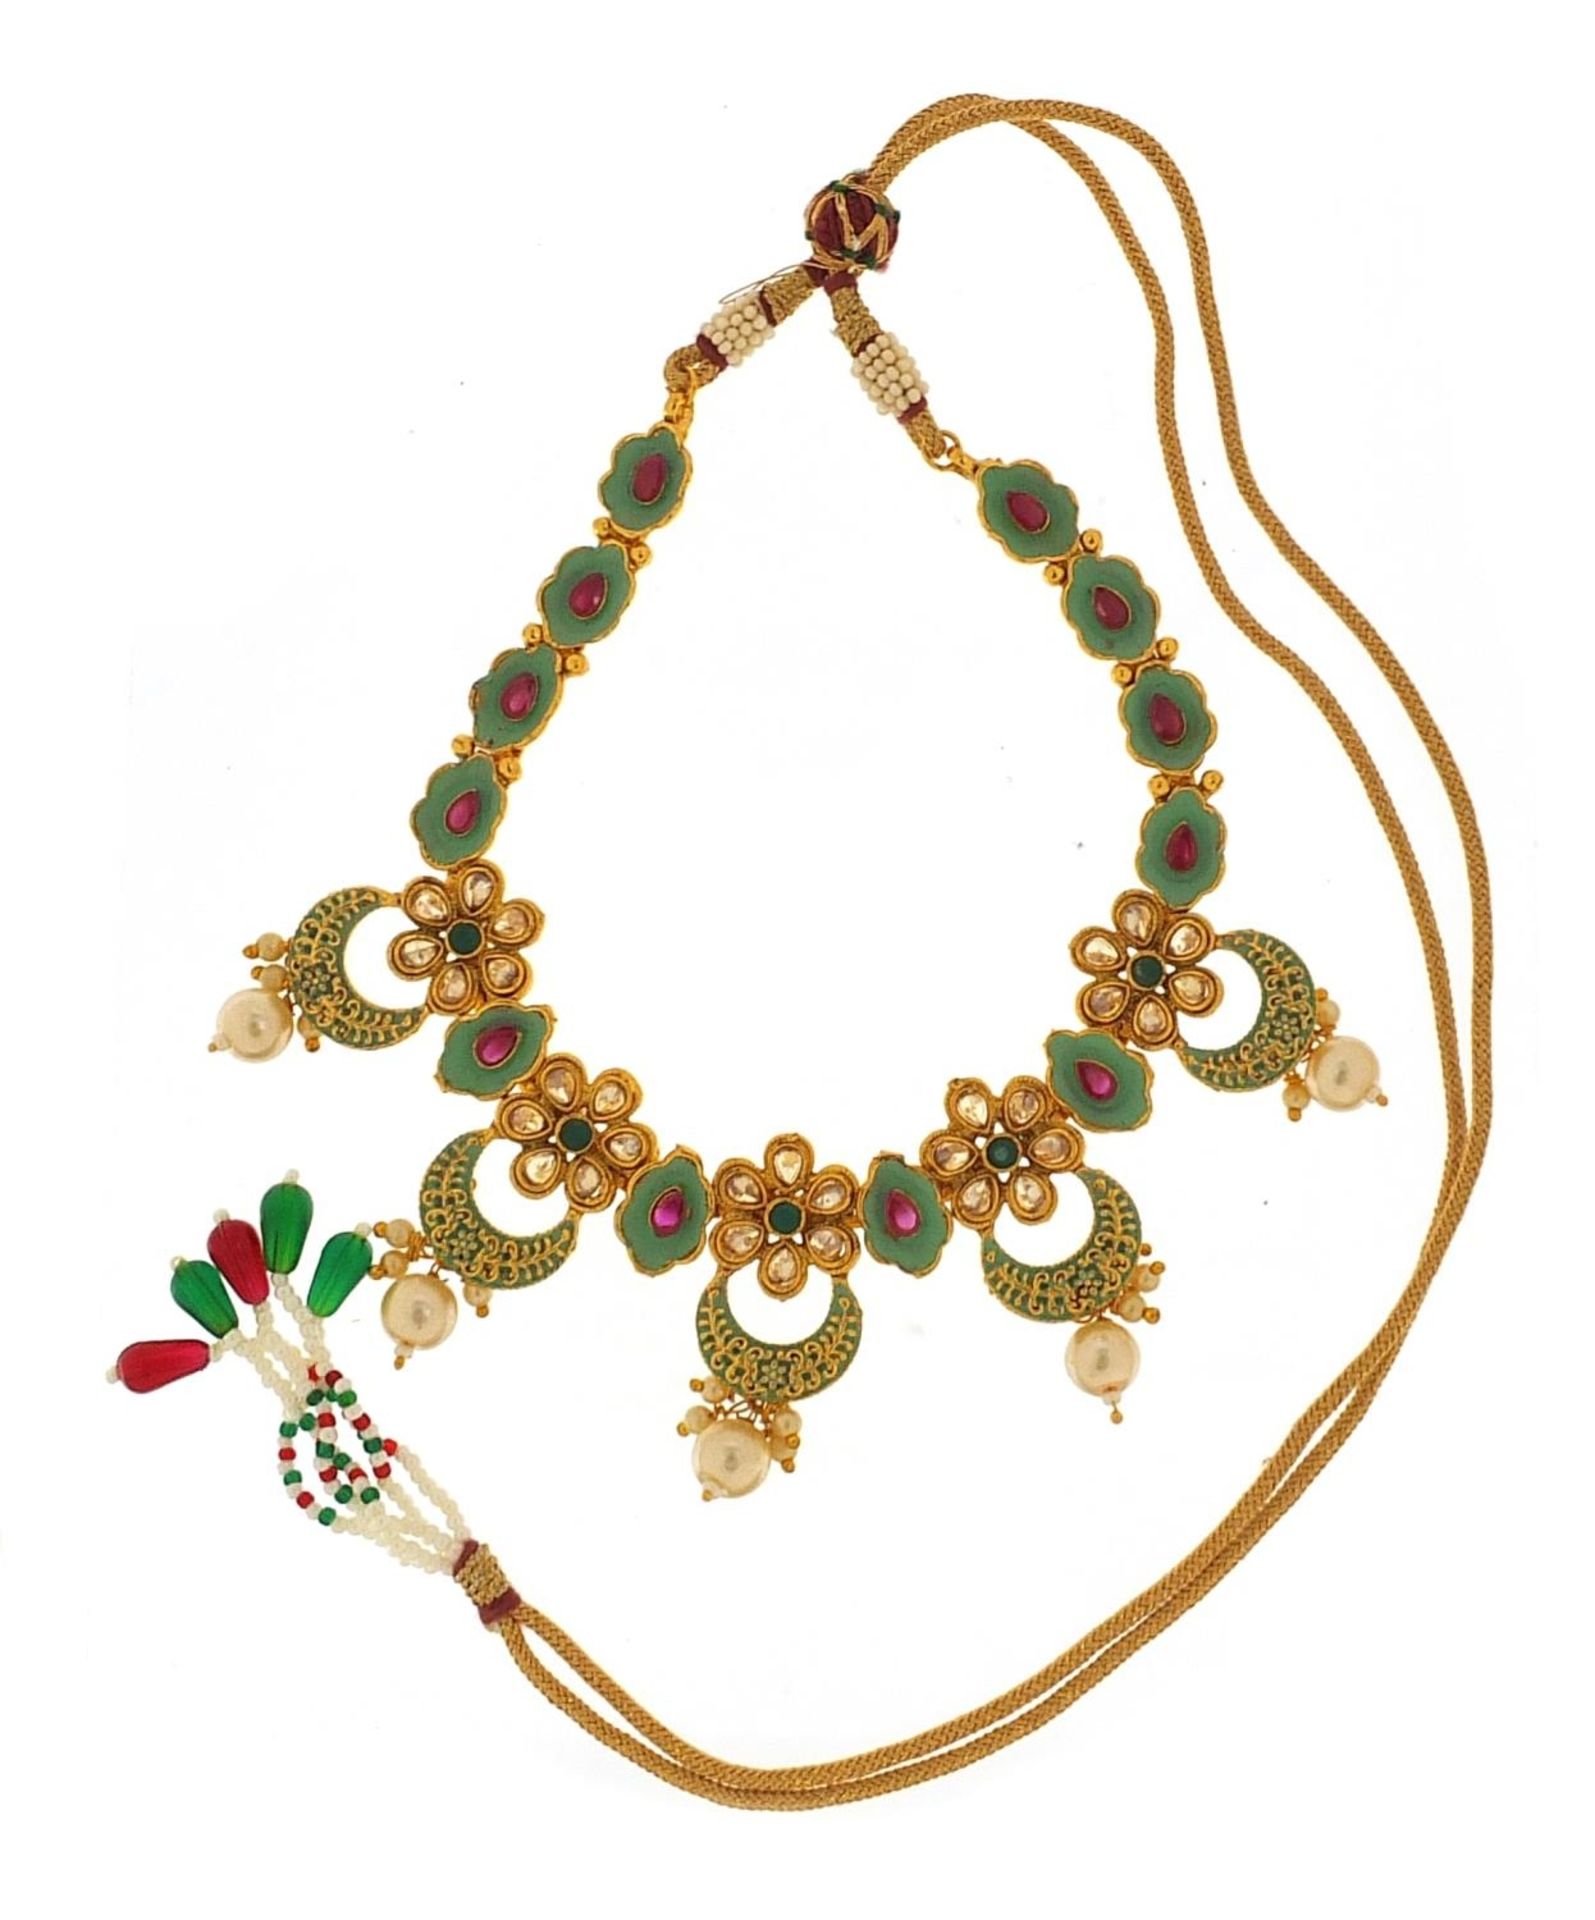 Islamic gilt metal, enamel and beadwork necklace with matching earrings, the necklace 80cm in length - Image 5 of 7